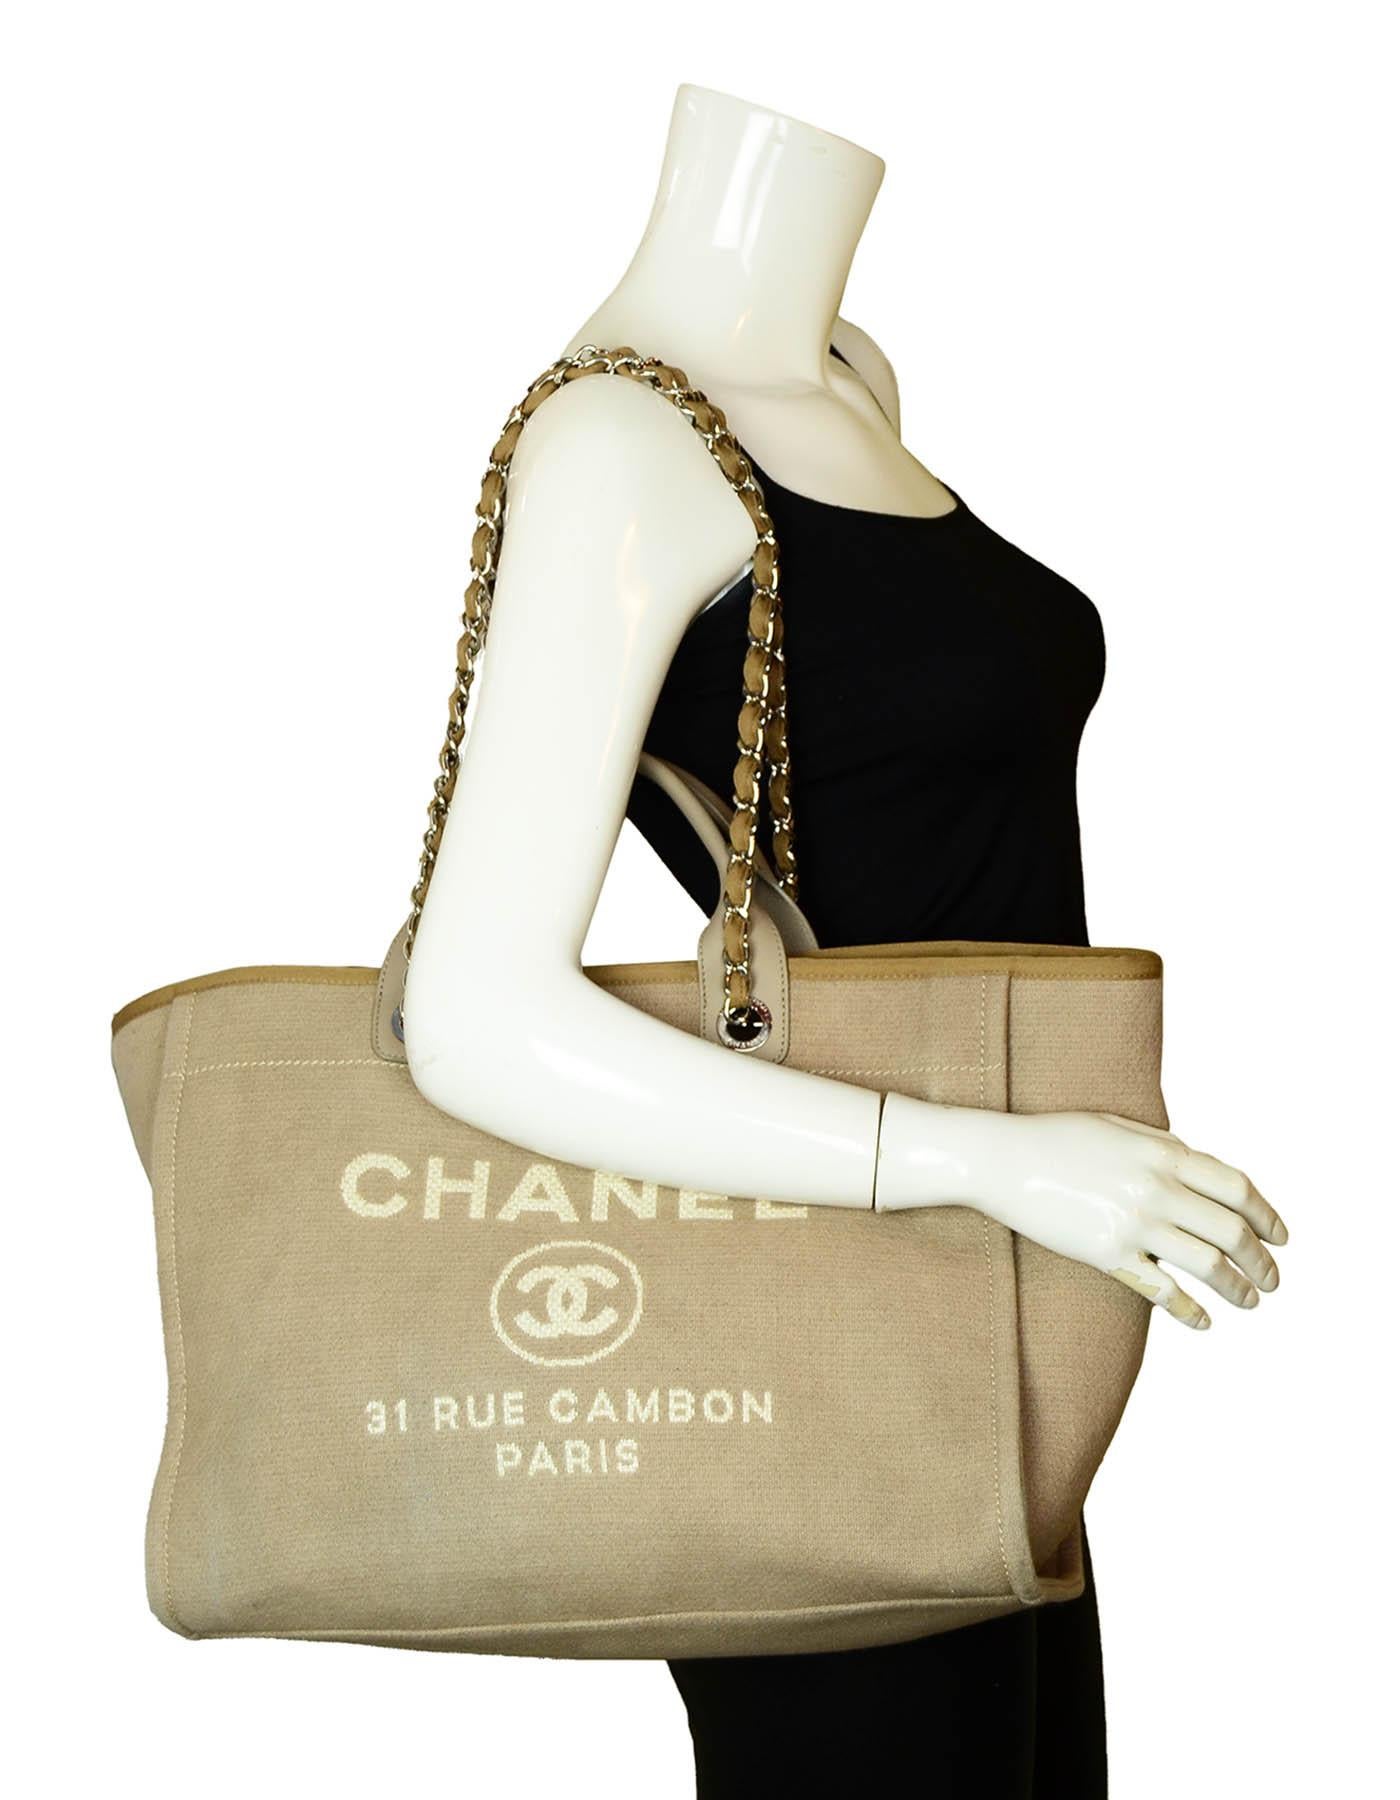 Chanel Ecru Beige Canvas Medium Deauville Tote Bag

Made In: Italy
Year of Production: 2017
Color: Beige
Hardware: Silvertone
Materials: Canvas with leather trim
Lining: Beige textile
Closure/Opening: Open top with center magnet
Exterior Pockets: